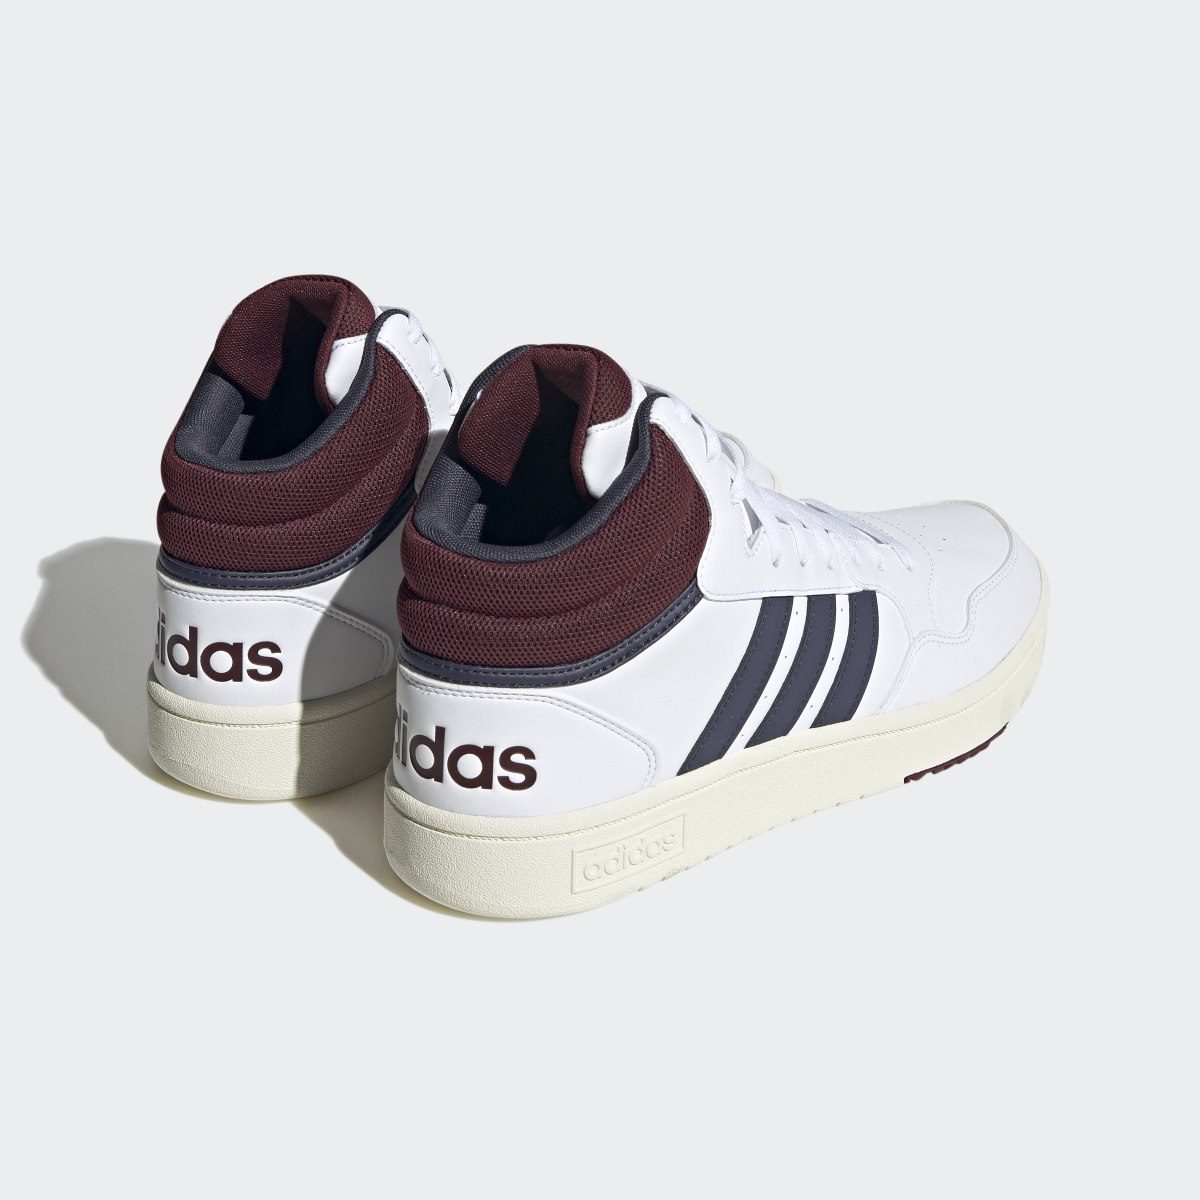 Adidas Hoops 3.0 Mid Lifestyle Basketball Classic Vintage Shoes. 6